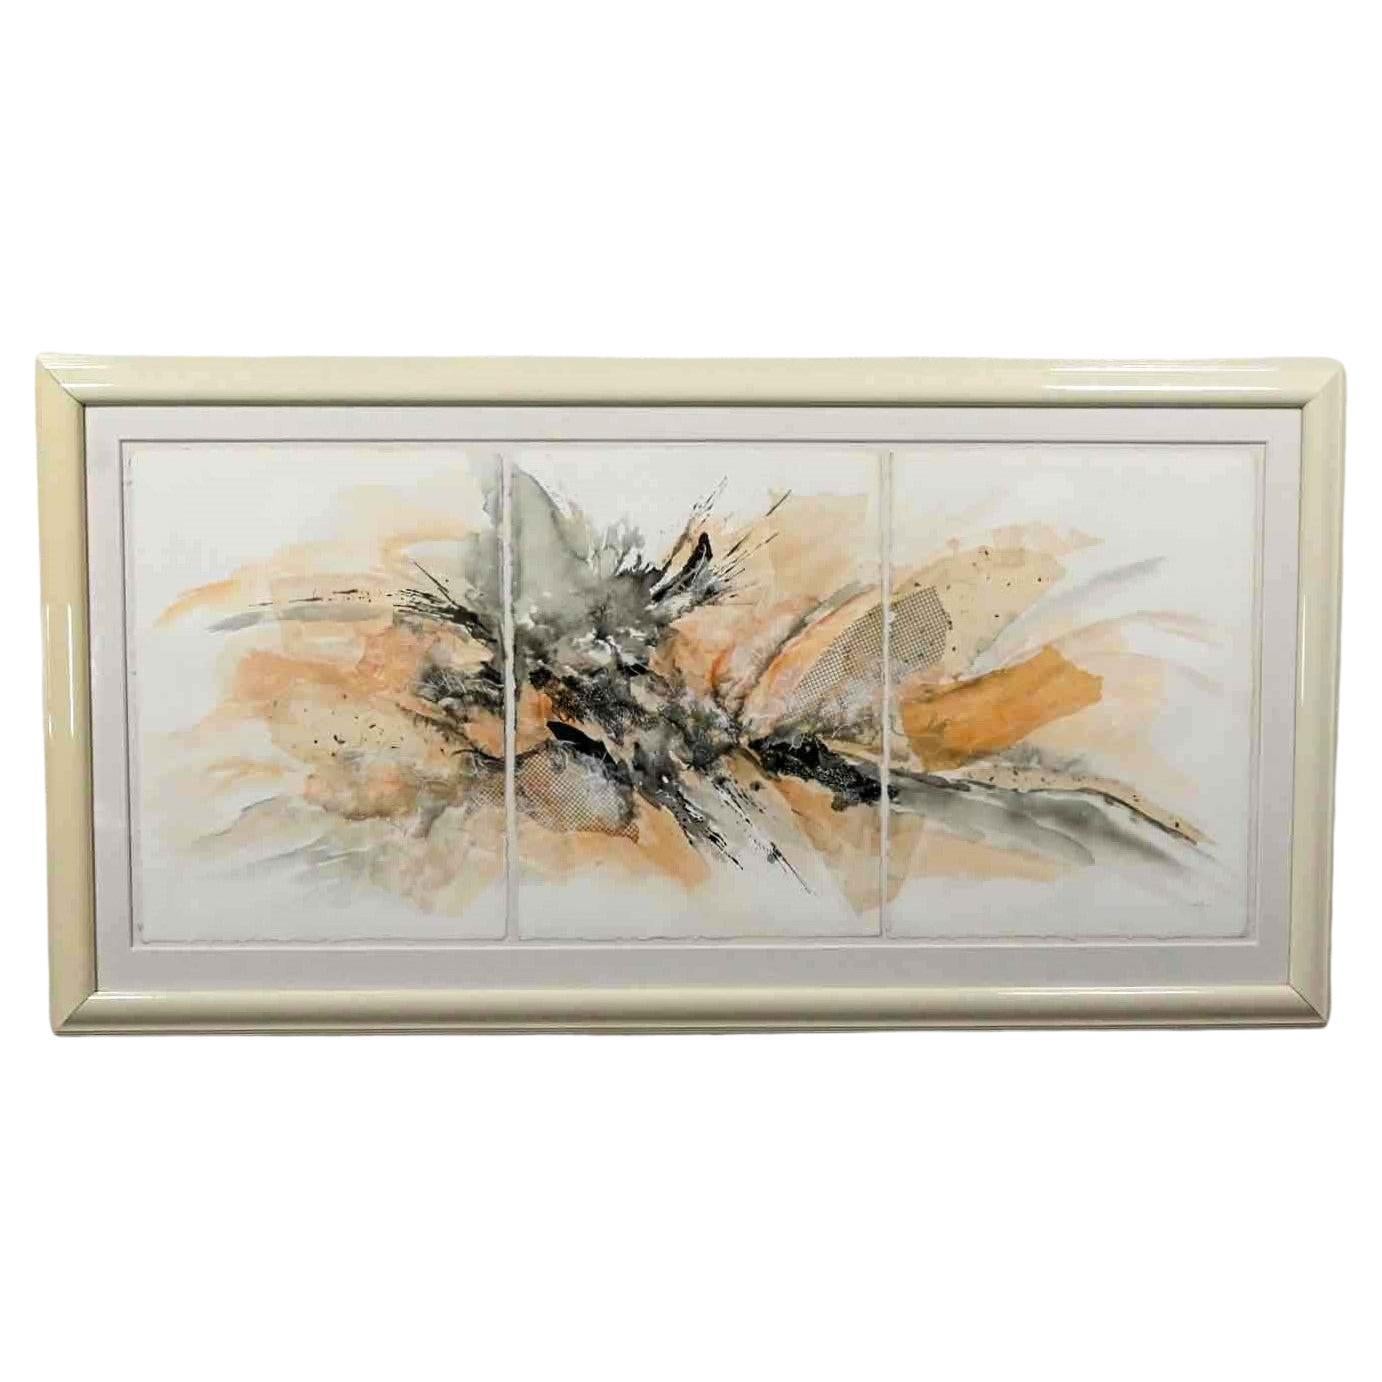 Vintage Large Textured Abstract Mixed Media Triptych Painting Wall Art by Koo